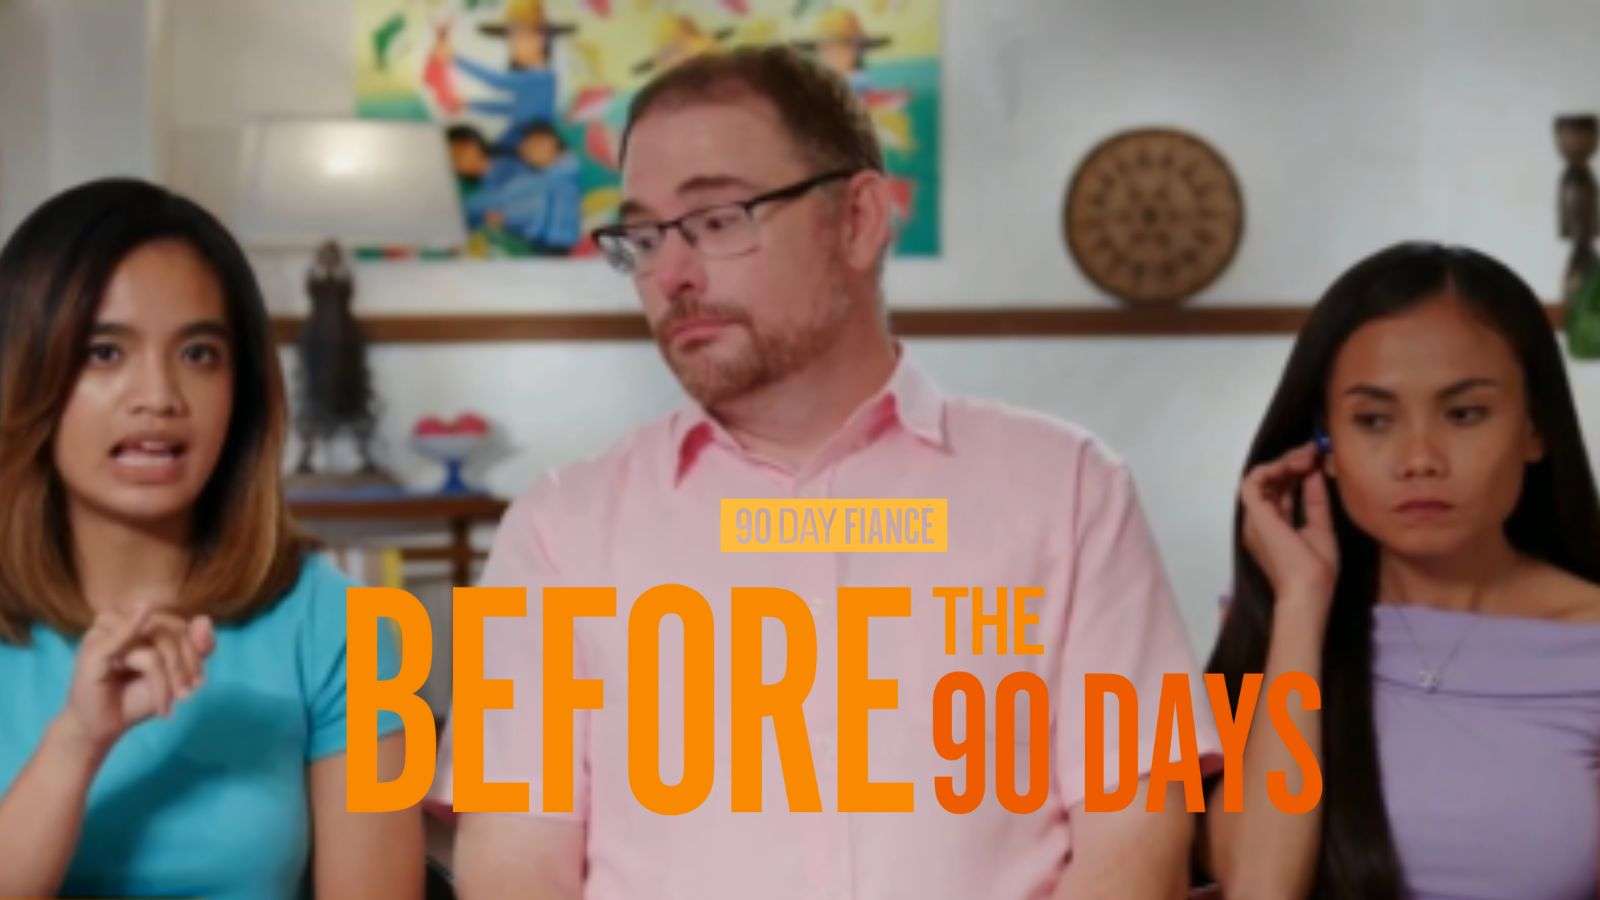 Sheila and David from 90 Day Fiancé: Before the 90 Days